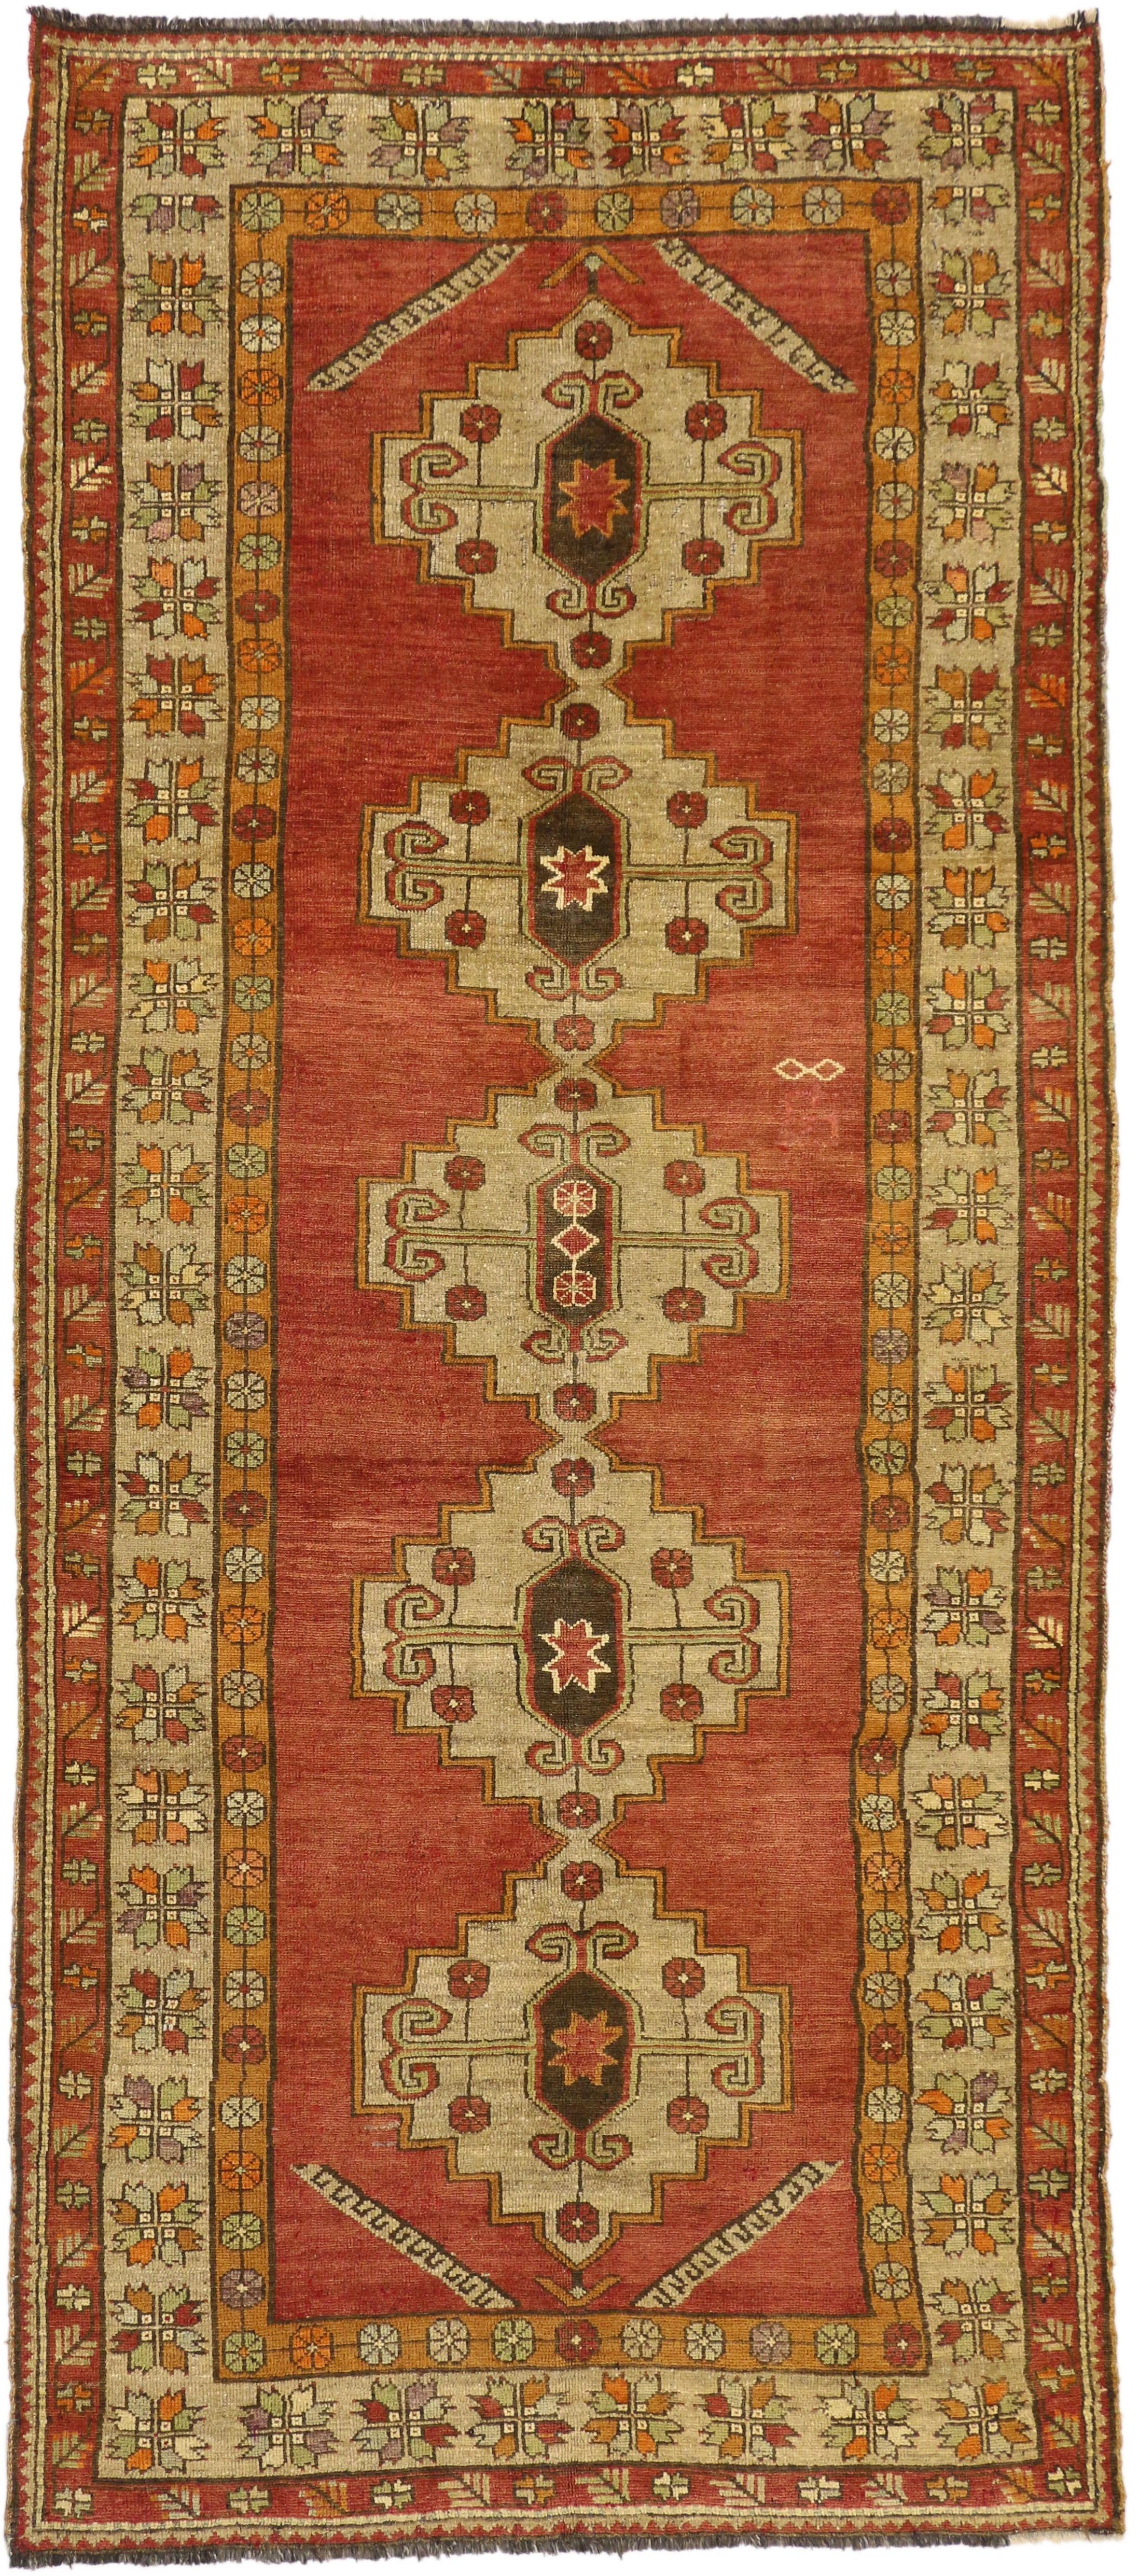 50468, vintage Turkish Oushak runner with Mid-Century Modern style, hallway runner. With its modern style and vibrant colors, this vintage Turkish Oushak wide hallway runner displays a stately presence. Along the center, well-balanced stepped